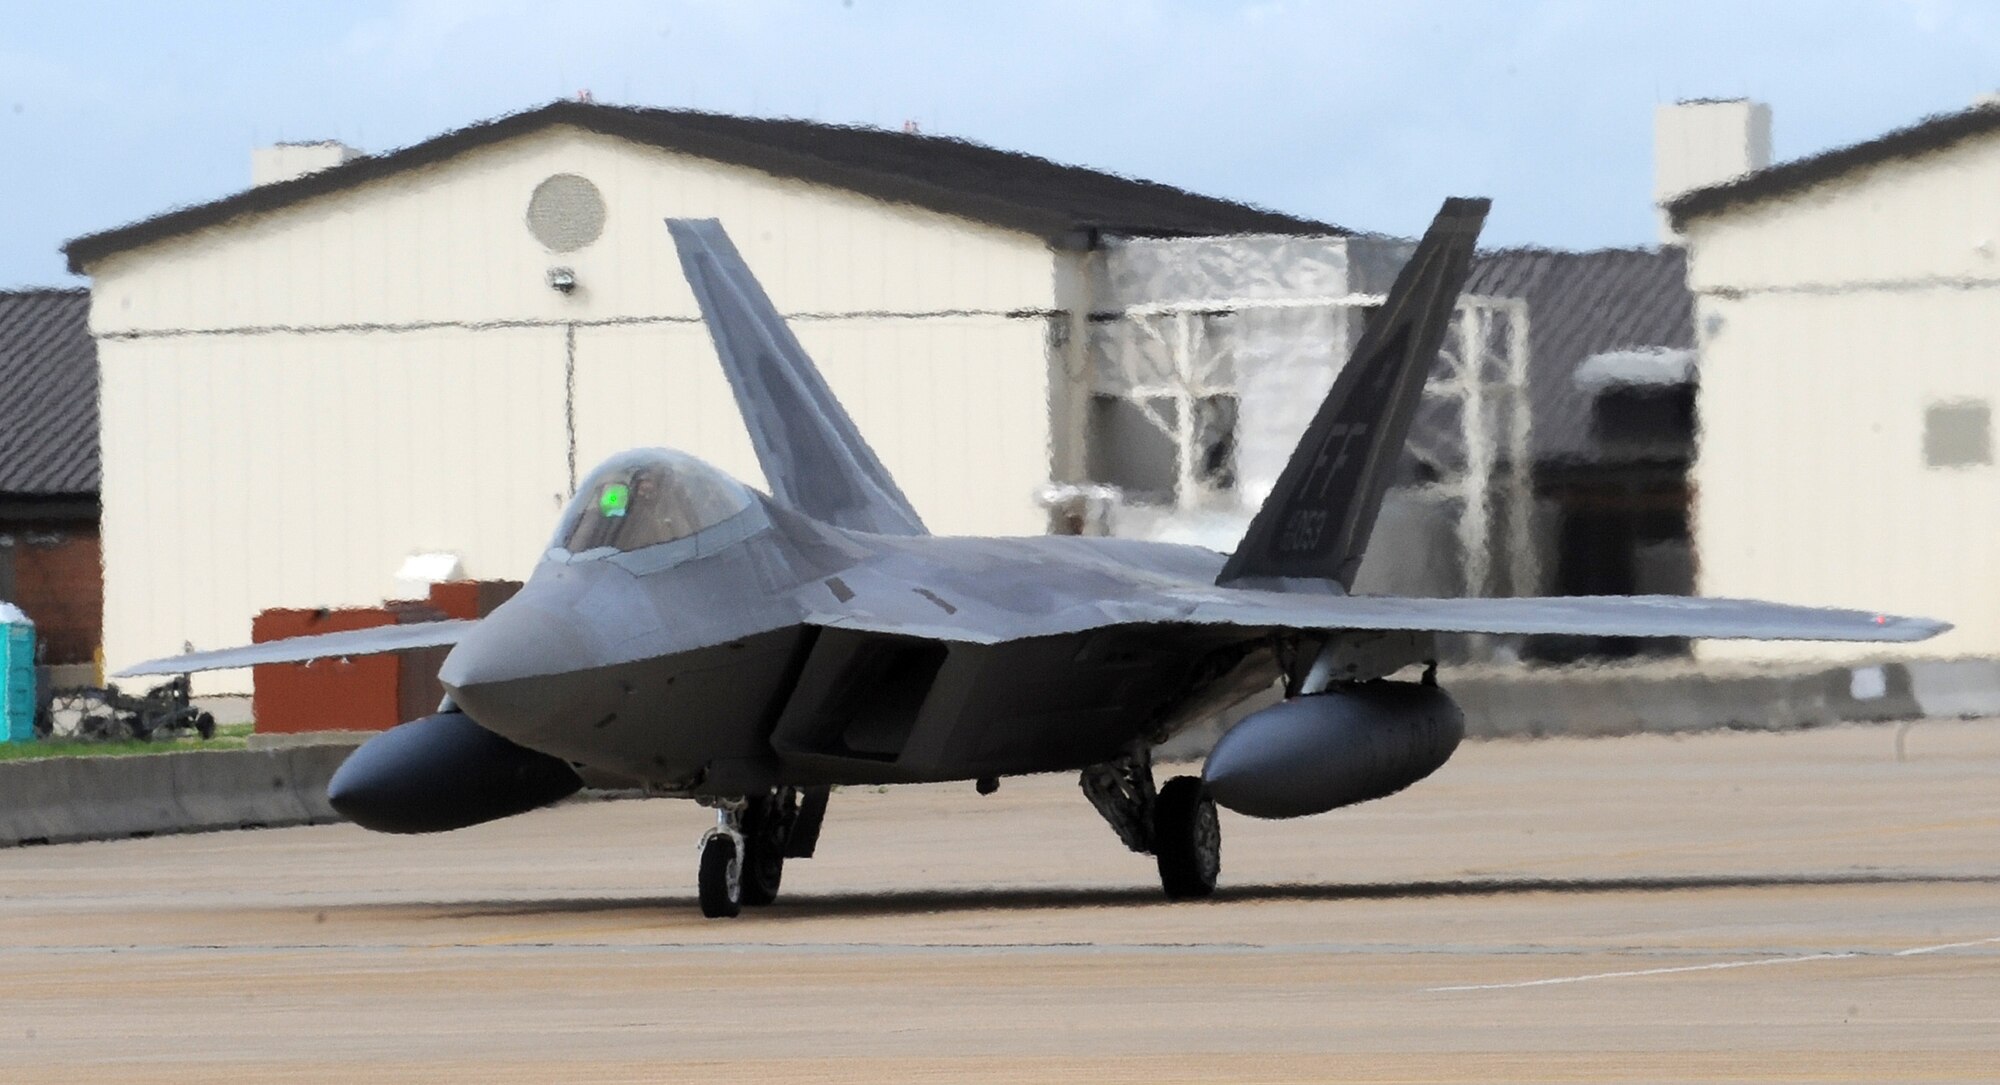 LANGLEY AIR FORCE BASE, Va. – An F-22A Raptor from the 94th Fighter Squadron taxis in preparation for depature to Kadena Air Base, Japan, May 26.  More than 280 Langley Airmen and 12 F-22A Raptors depart this week for their Air Expeditionary Force deployment, which demonstrates the continued U.S. commitment to fulfill its security responsibilities throughout the Western Pacific.  This is the first overseas deployment for the 94th Fighter Squadron since transitioning to the F-22.  (U.S. photo/Senior Airman Zachary Wolf)